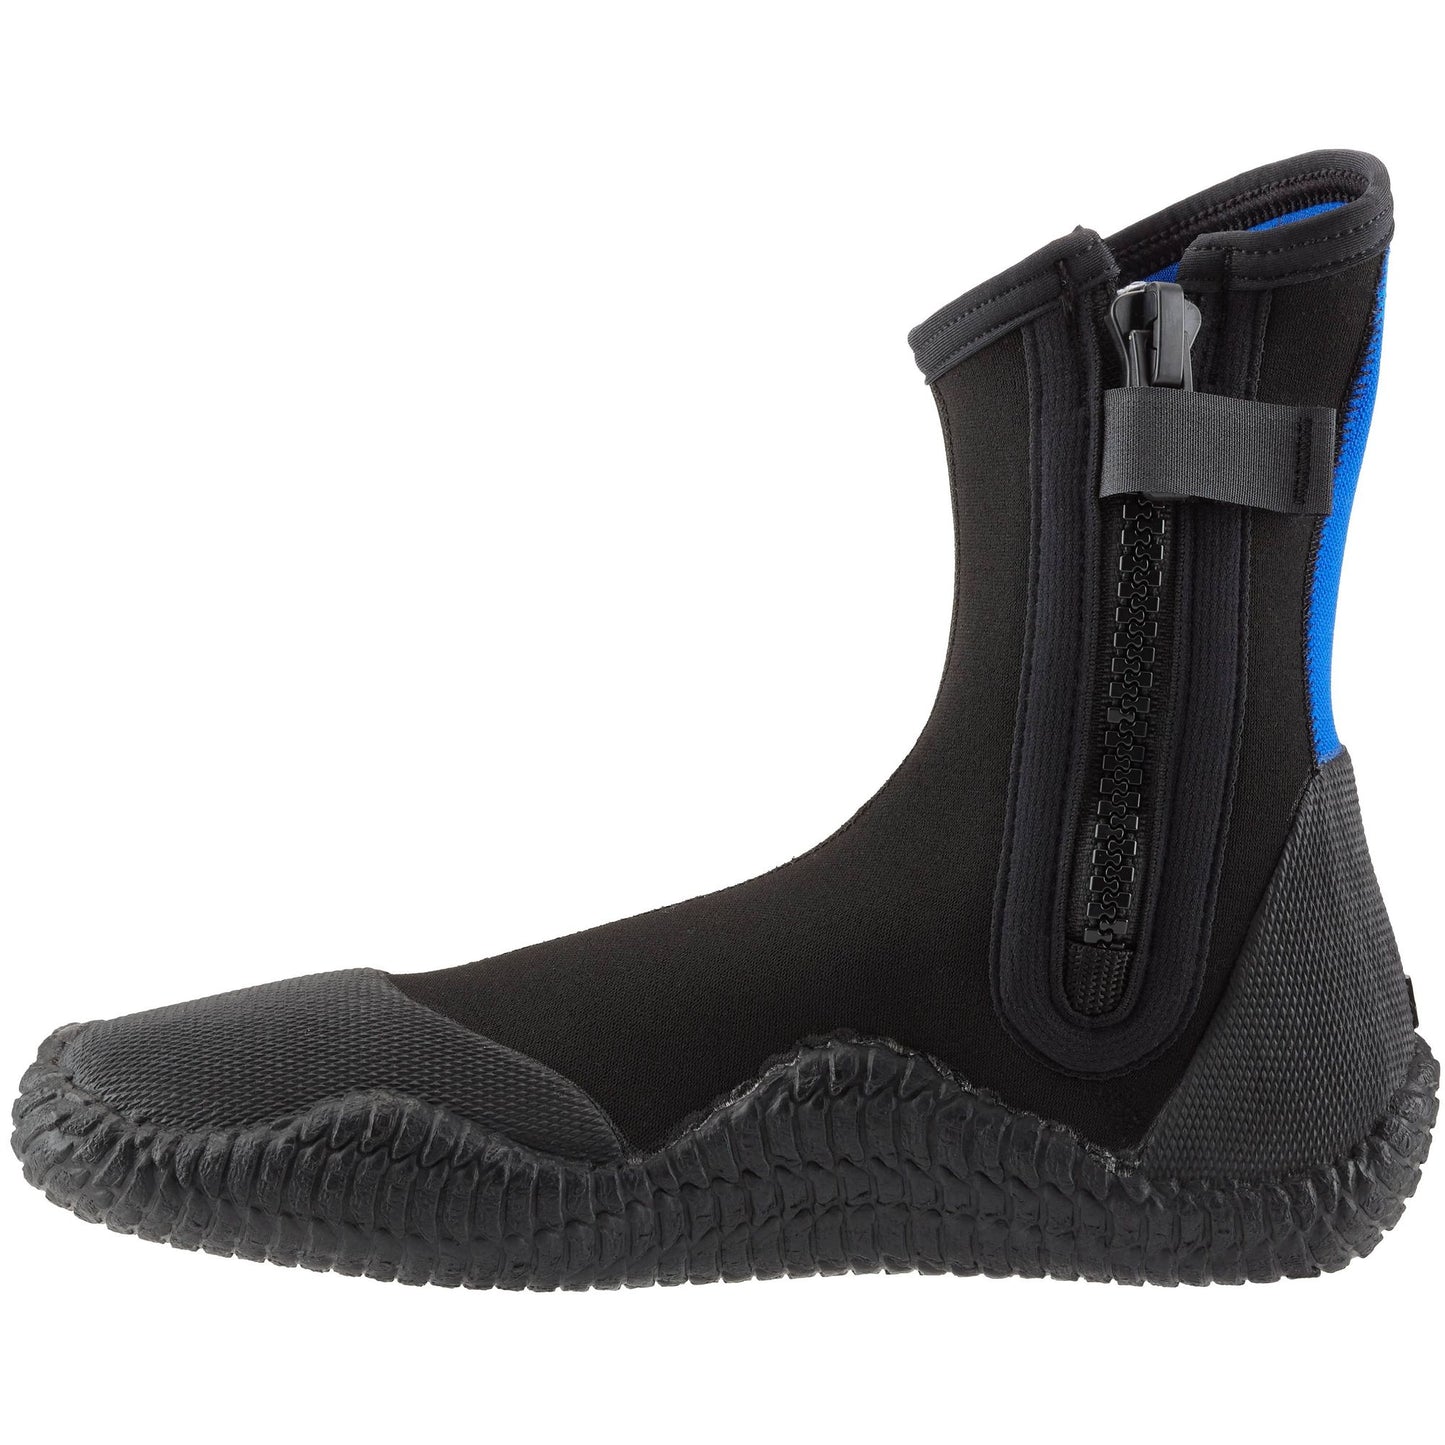 A pair of NRS Comm-3 Youth WetShoes in black and blue, providing support.